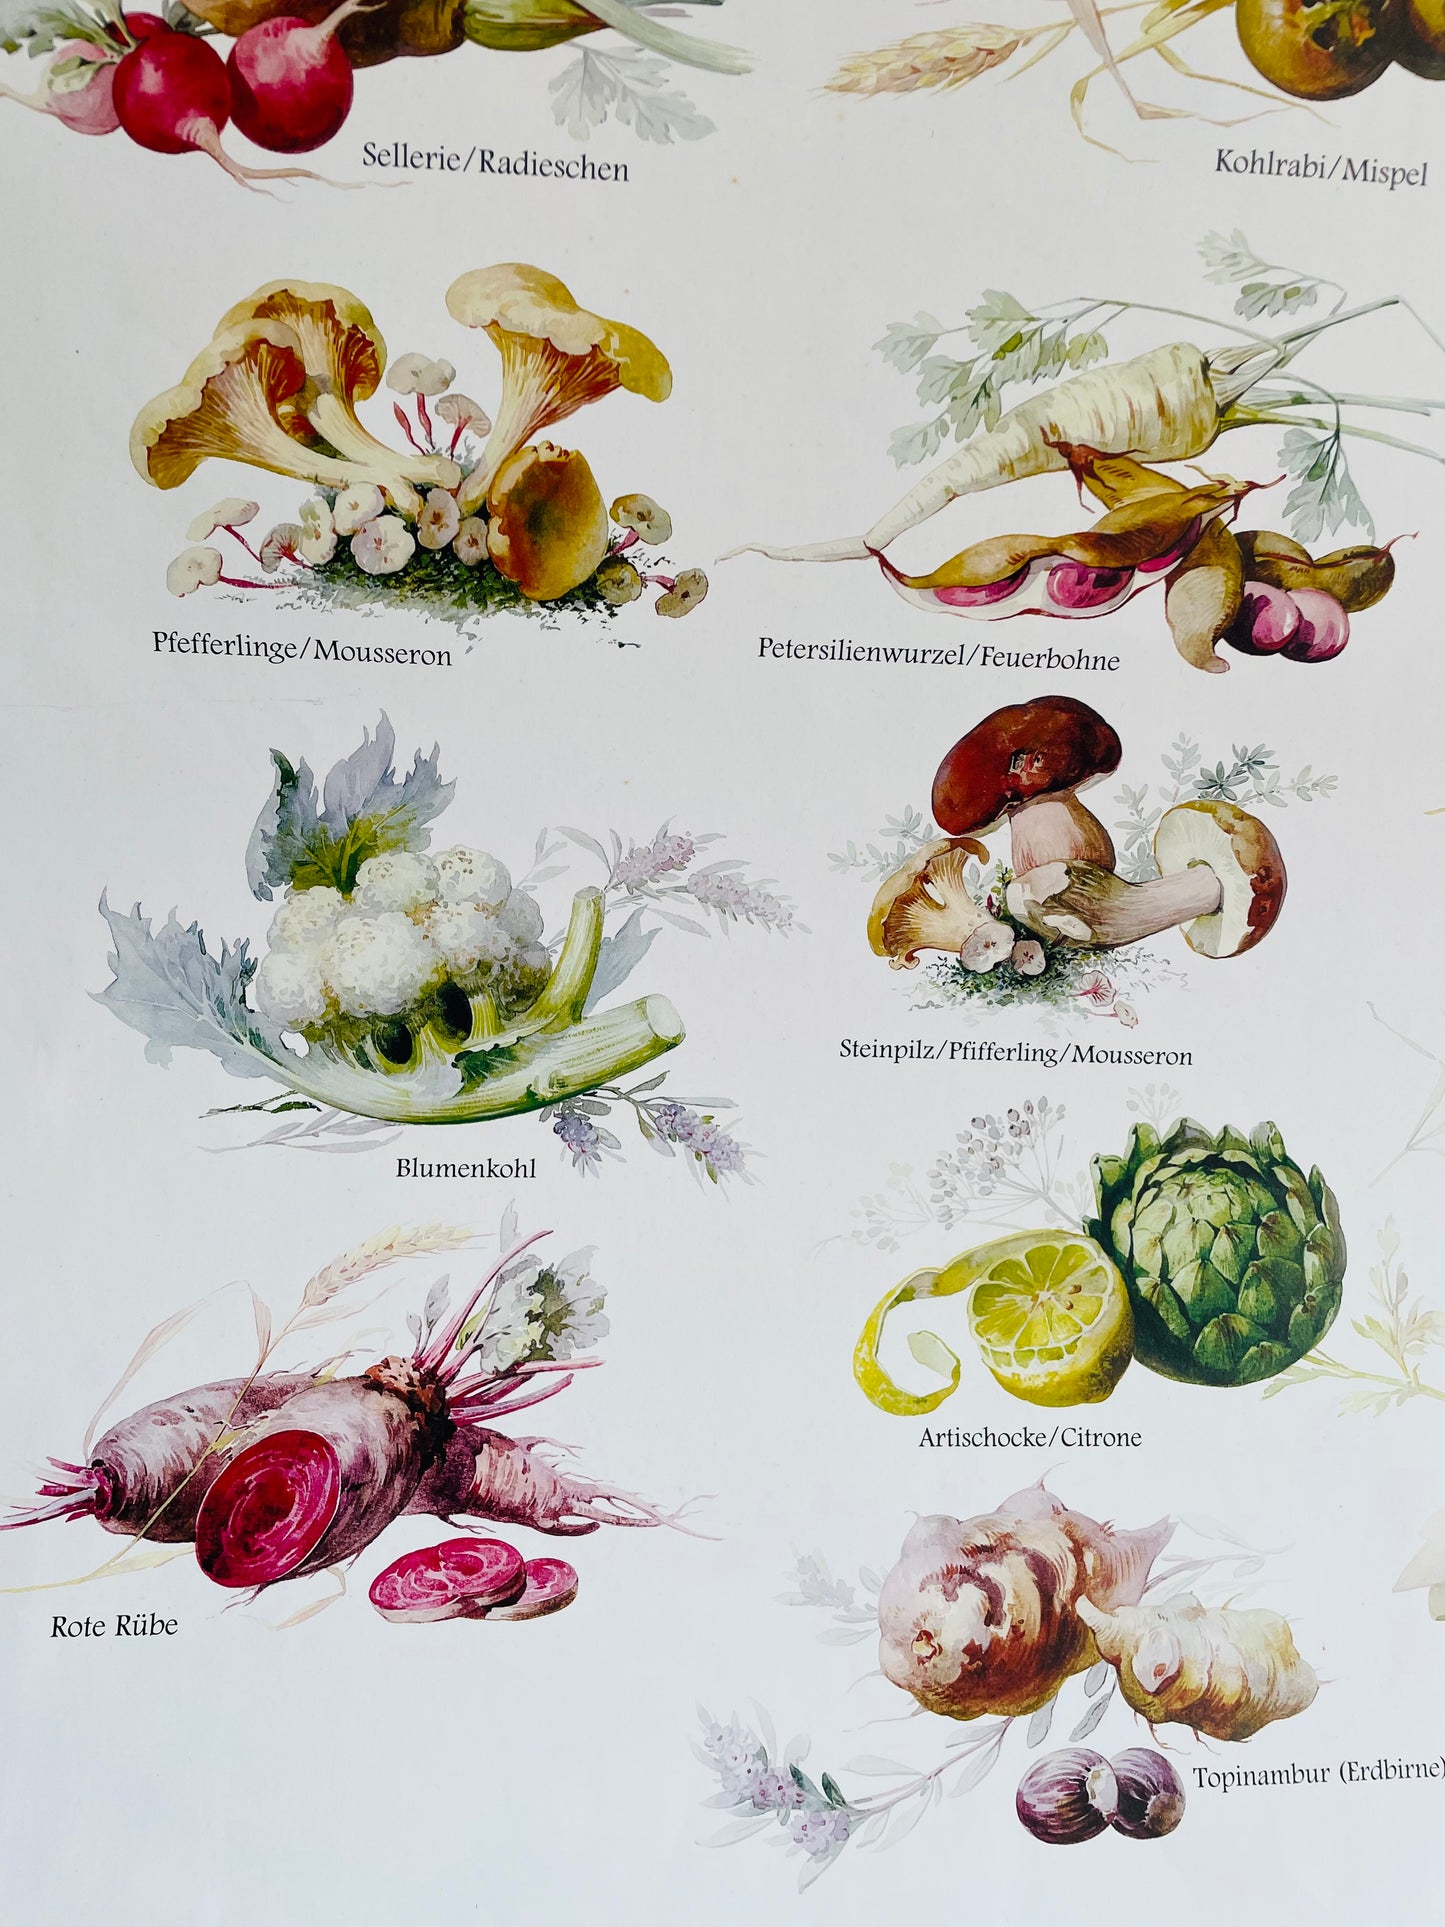 German Language Poster with Gorgeous Vegetable Illustrations - From the Prussian Palaces & Gardens Museum Shop - Berlin-Brandenburg